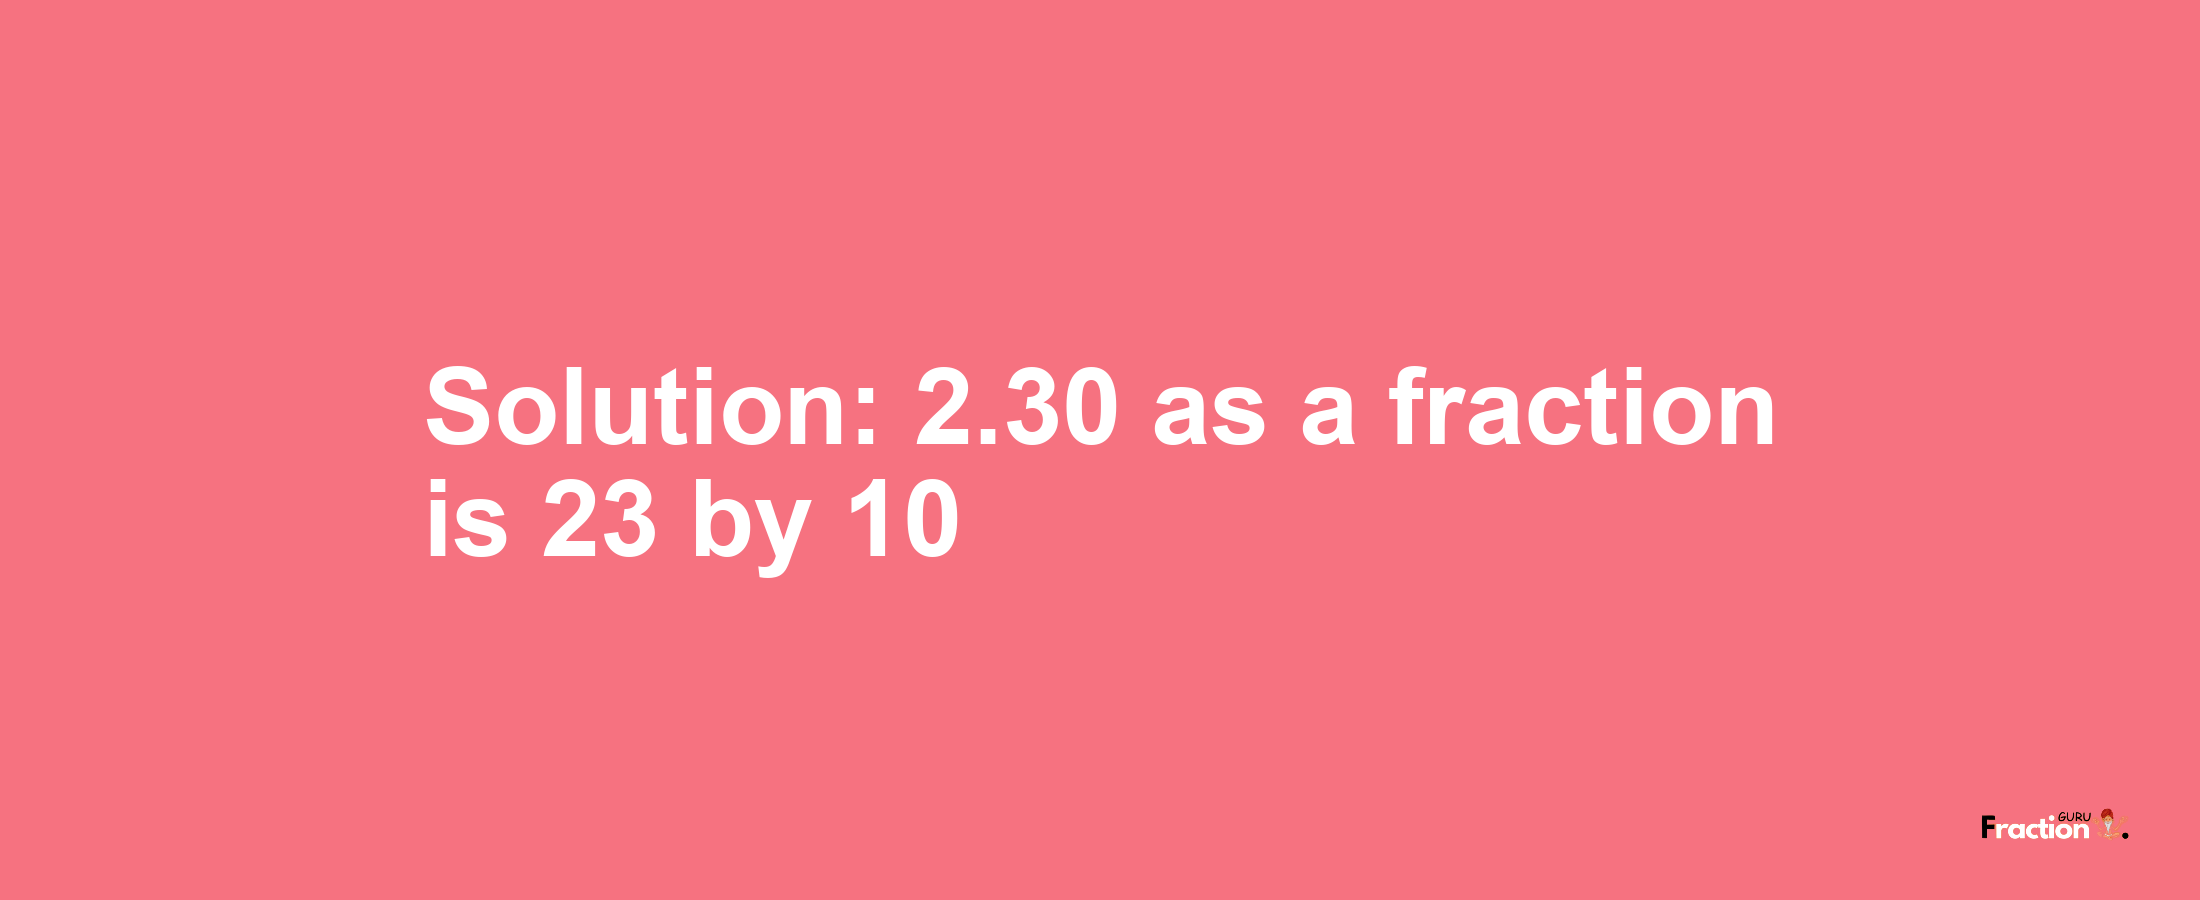 Solution:2.30 as a fraction is 23/10